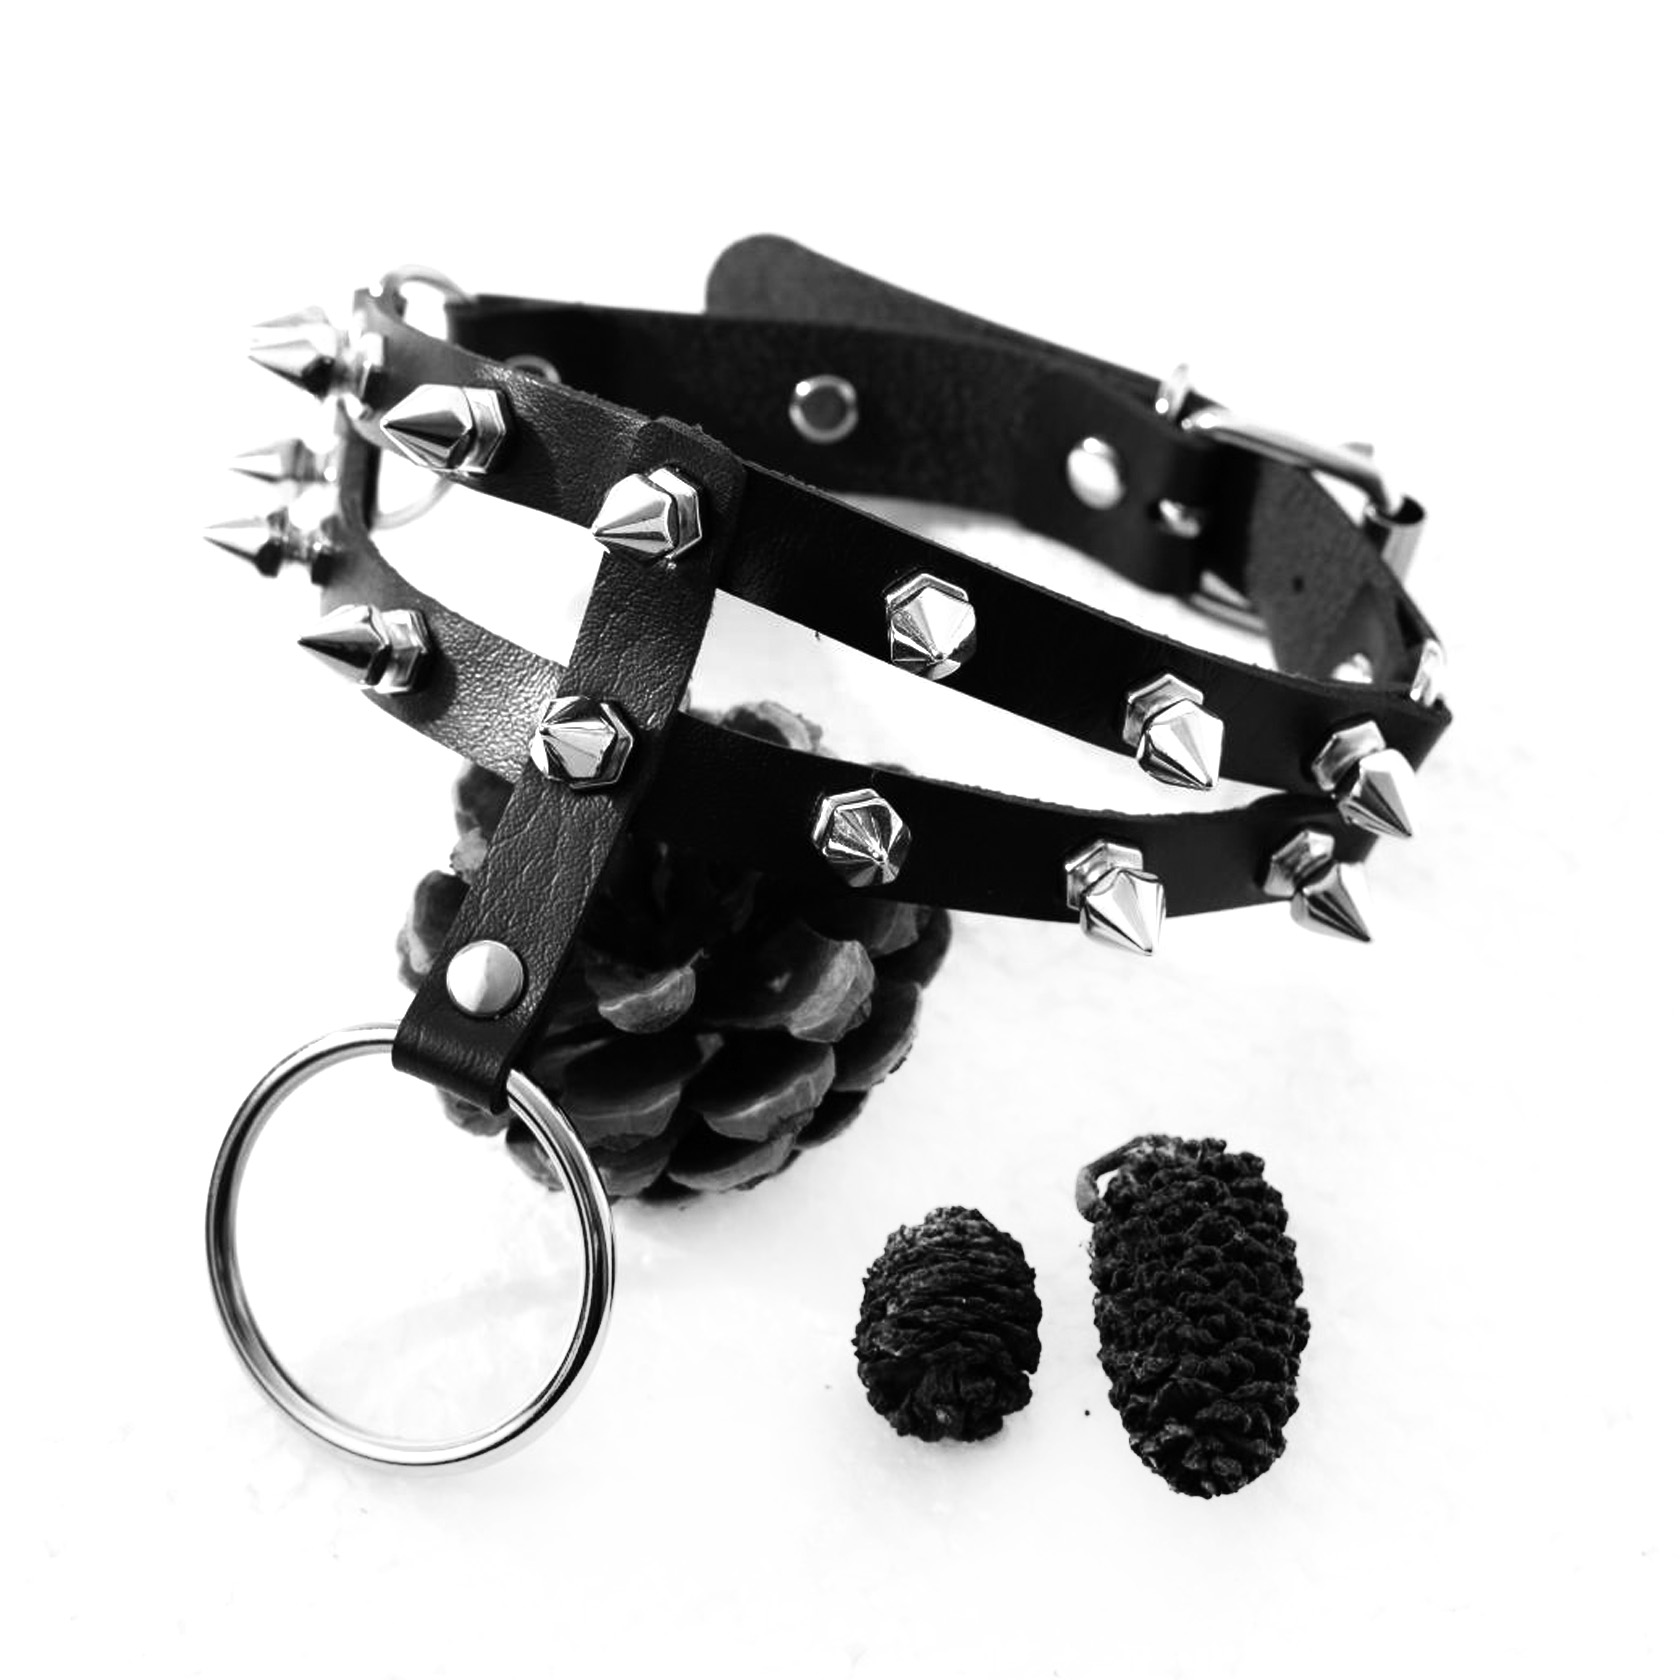 Rock biker leather studded double collar gothic adjustable necklace for men and women 